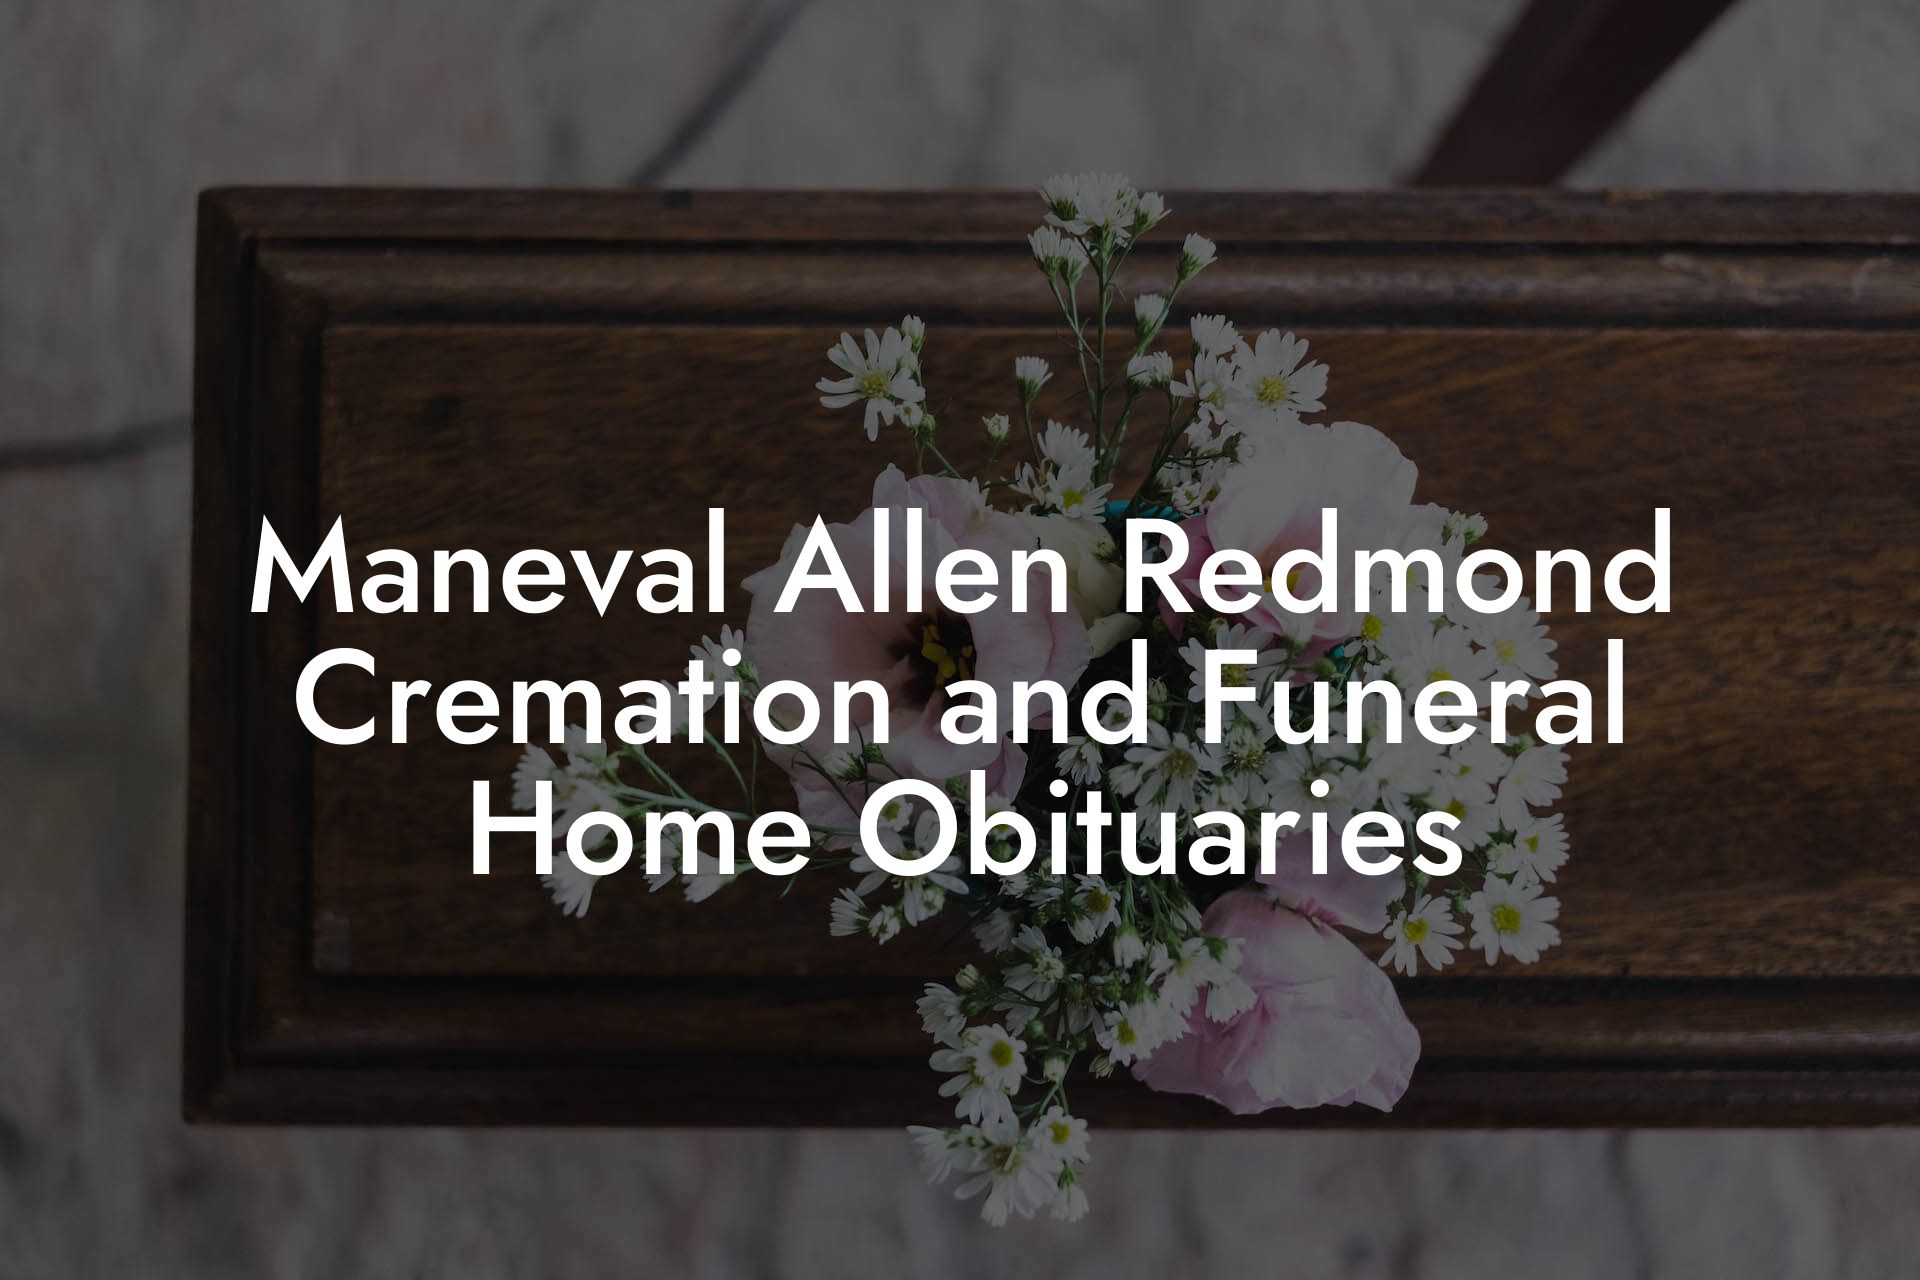 Maneval Allen Redmond Cremation and Funeral Home Obituaries